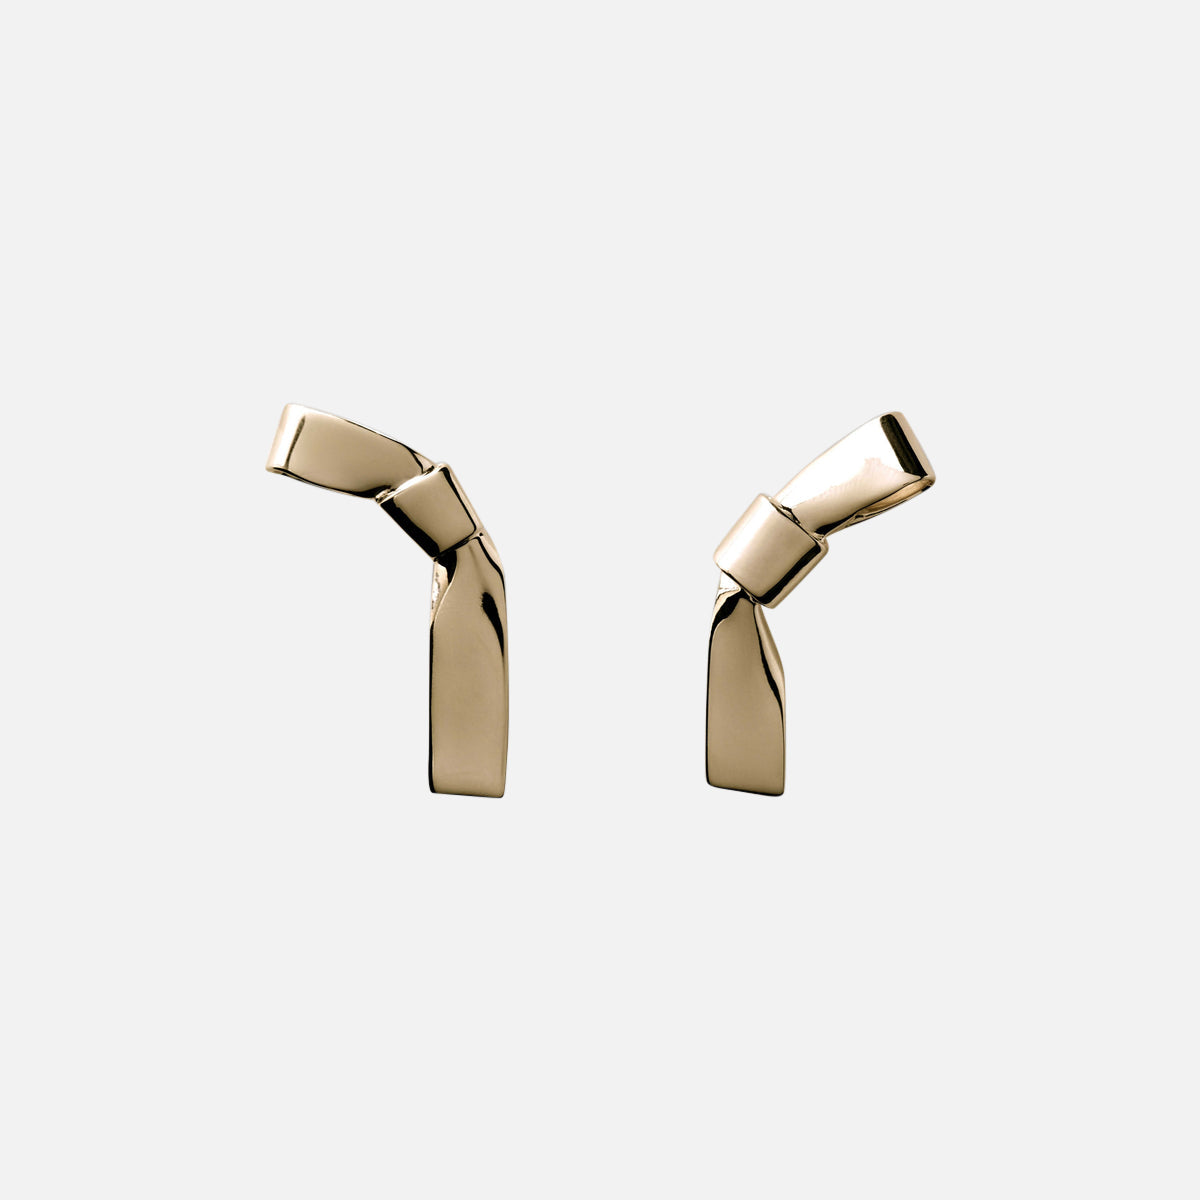 Gold Plated Grand Cravat Earrings, Small